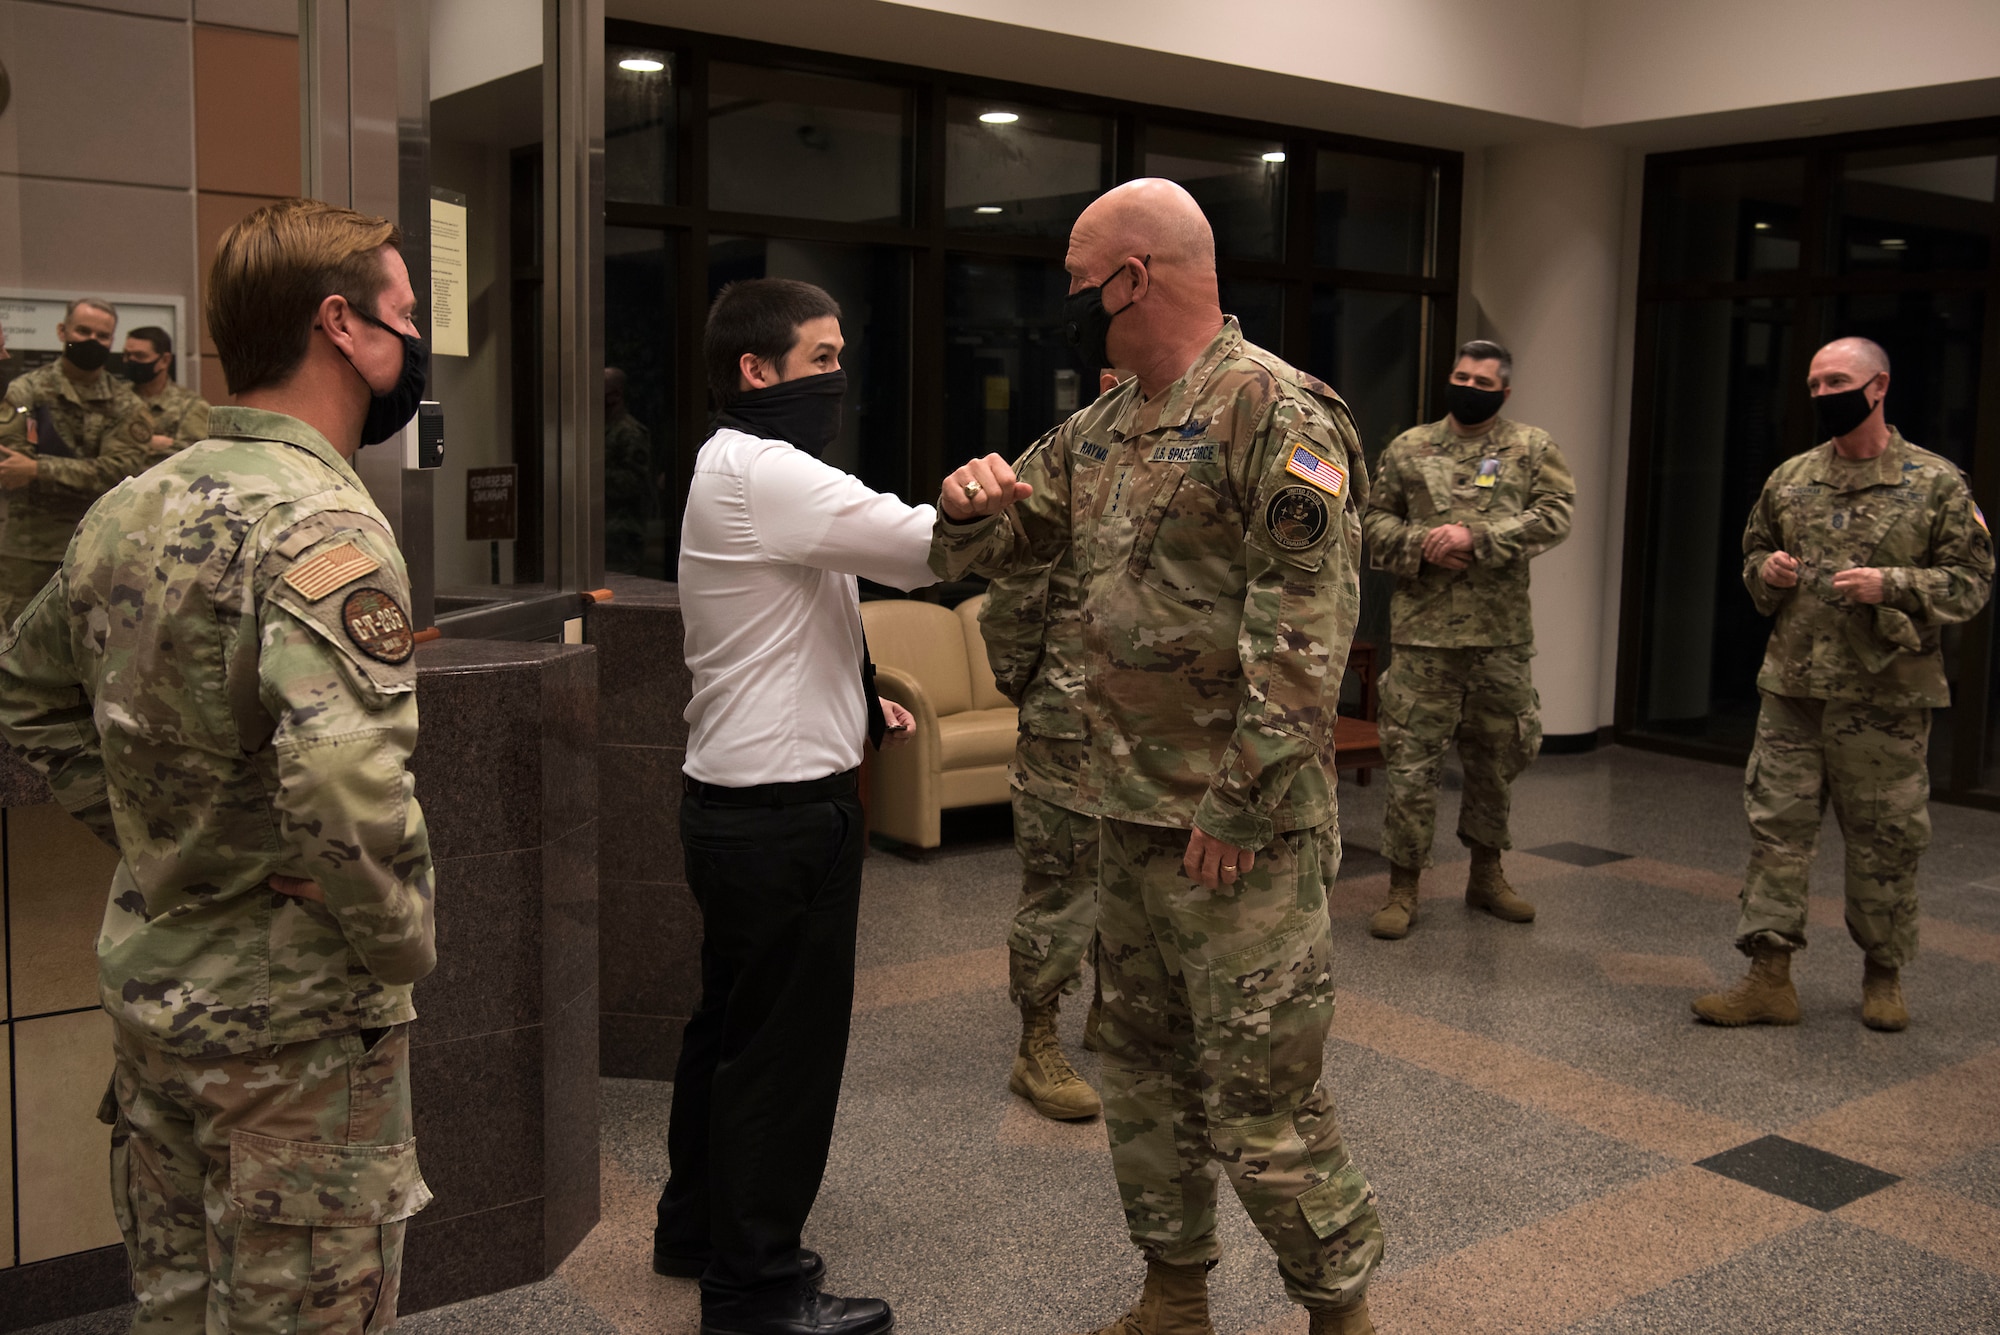 Gen. Jay Raymond, U.S. Space Force Chief of Space Operations and commander of U.S. Space Command, Chief Master Sgt. Roger A. Towberman, U.S. Space Force Senior Enlisted Advisor, are greeted by 30th Space Wing members at the 30th SW’s Western Range Operation Control Center Aug. 3, 2020 at Vandenberg Air Force Base, Calif.